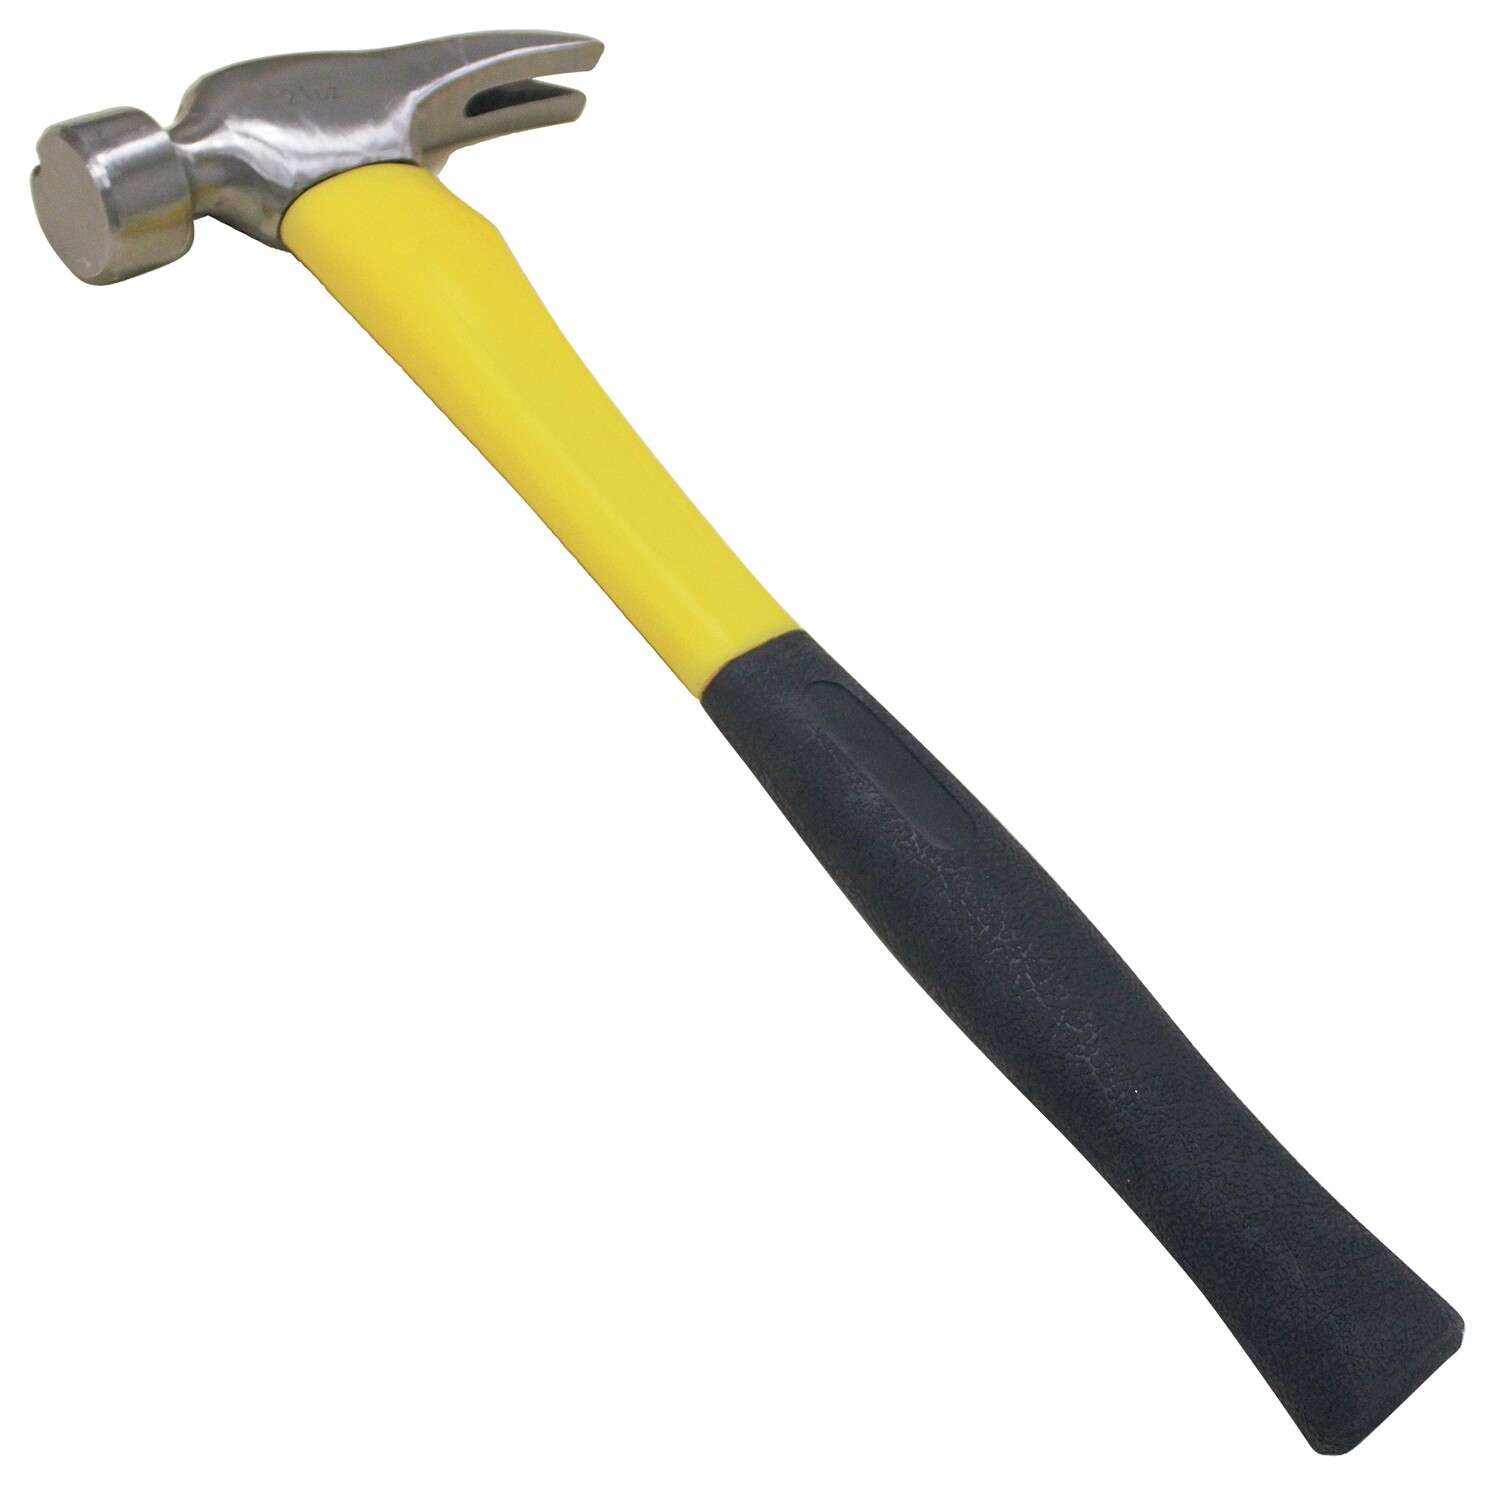 Kraft GG641 21 oz. Smooth Faced Framing Hammer with Fiberglass Handle Pack of 6